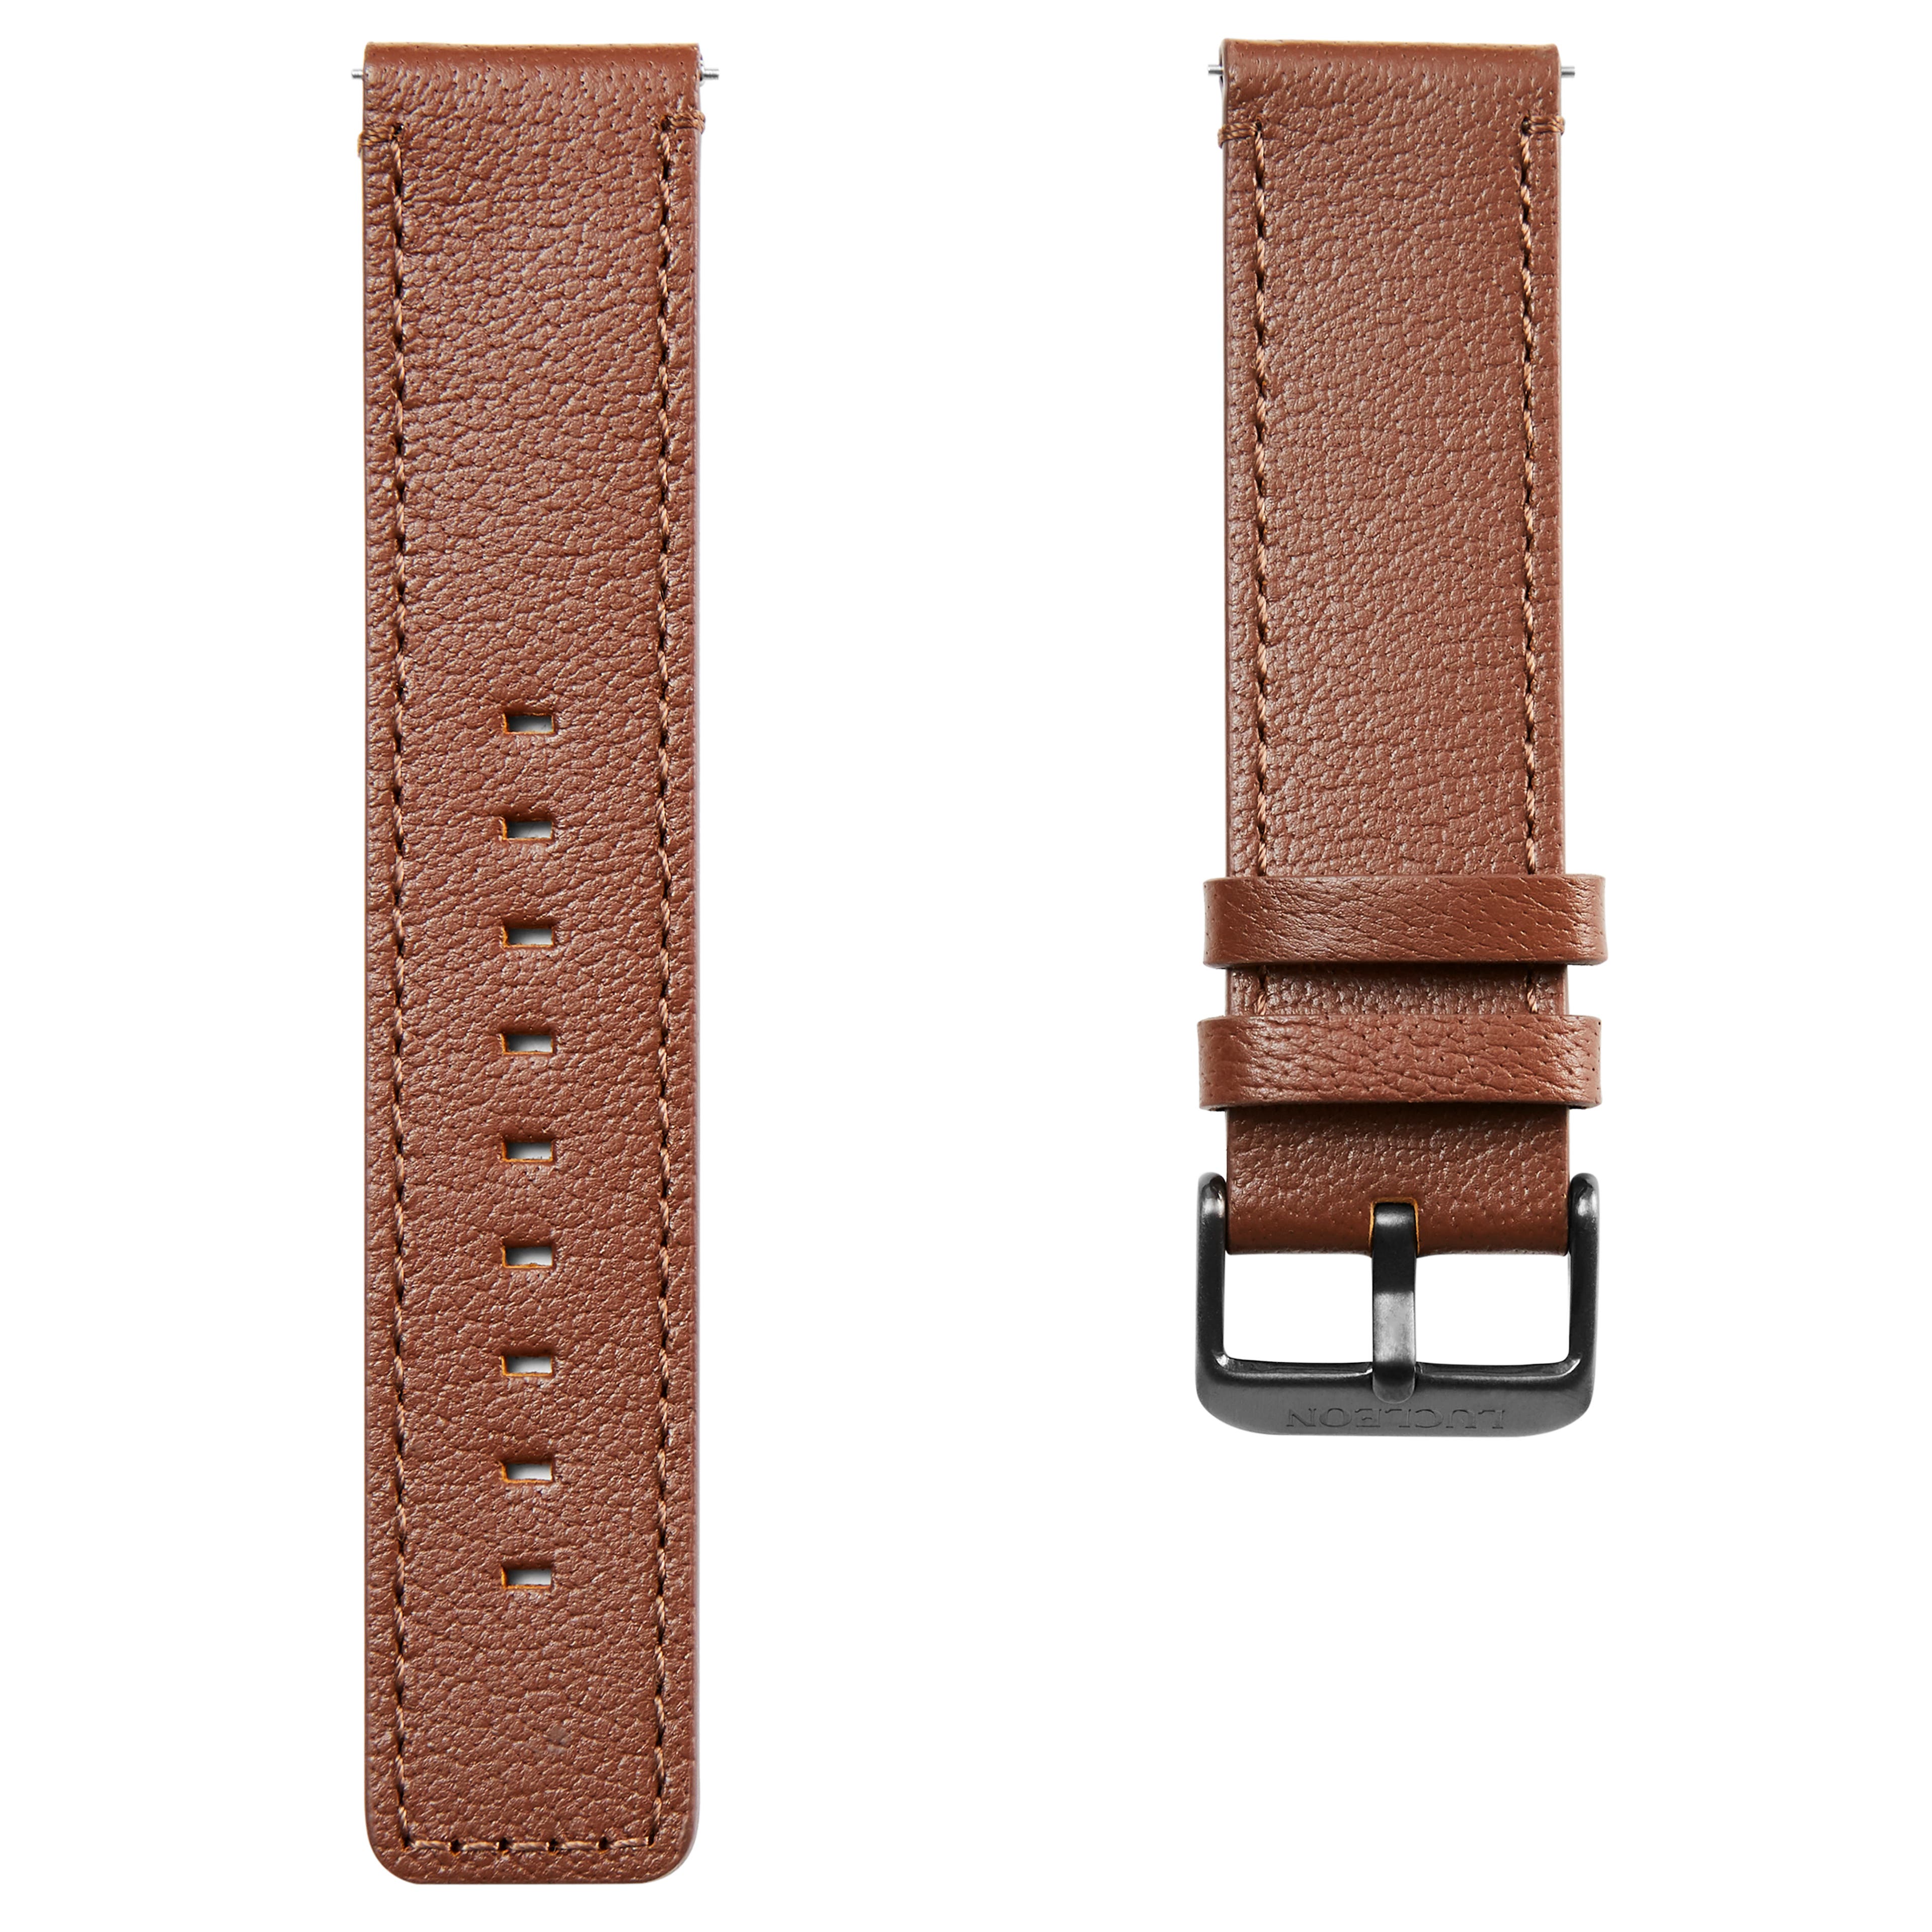 Tan Leather Watch Strap with Black Buckle